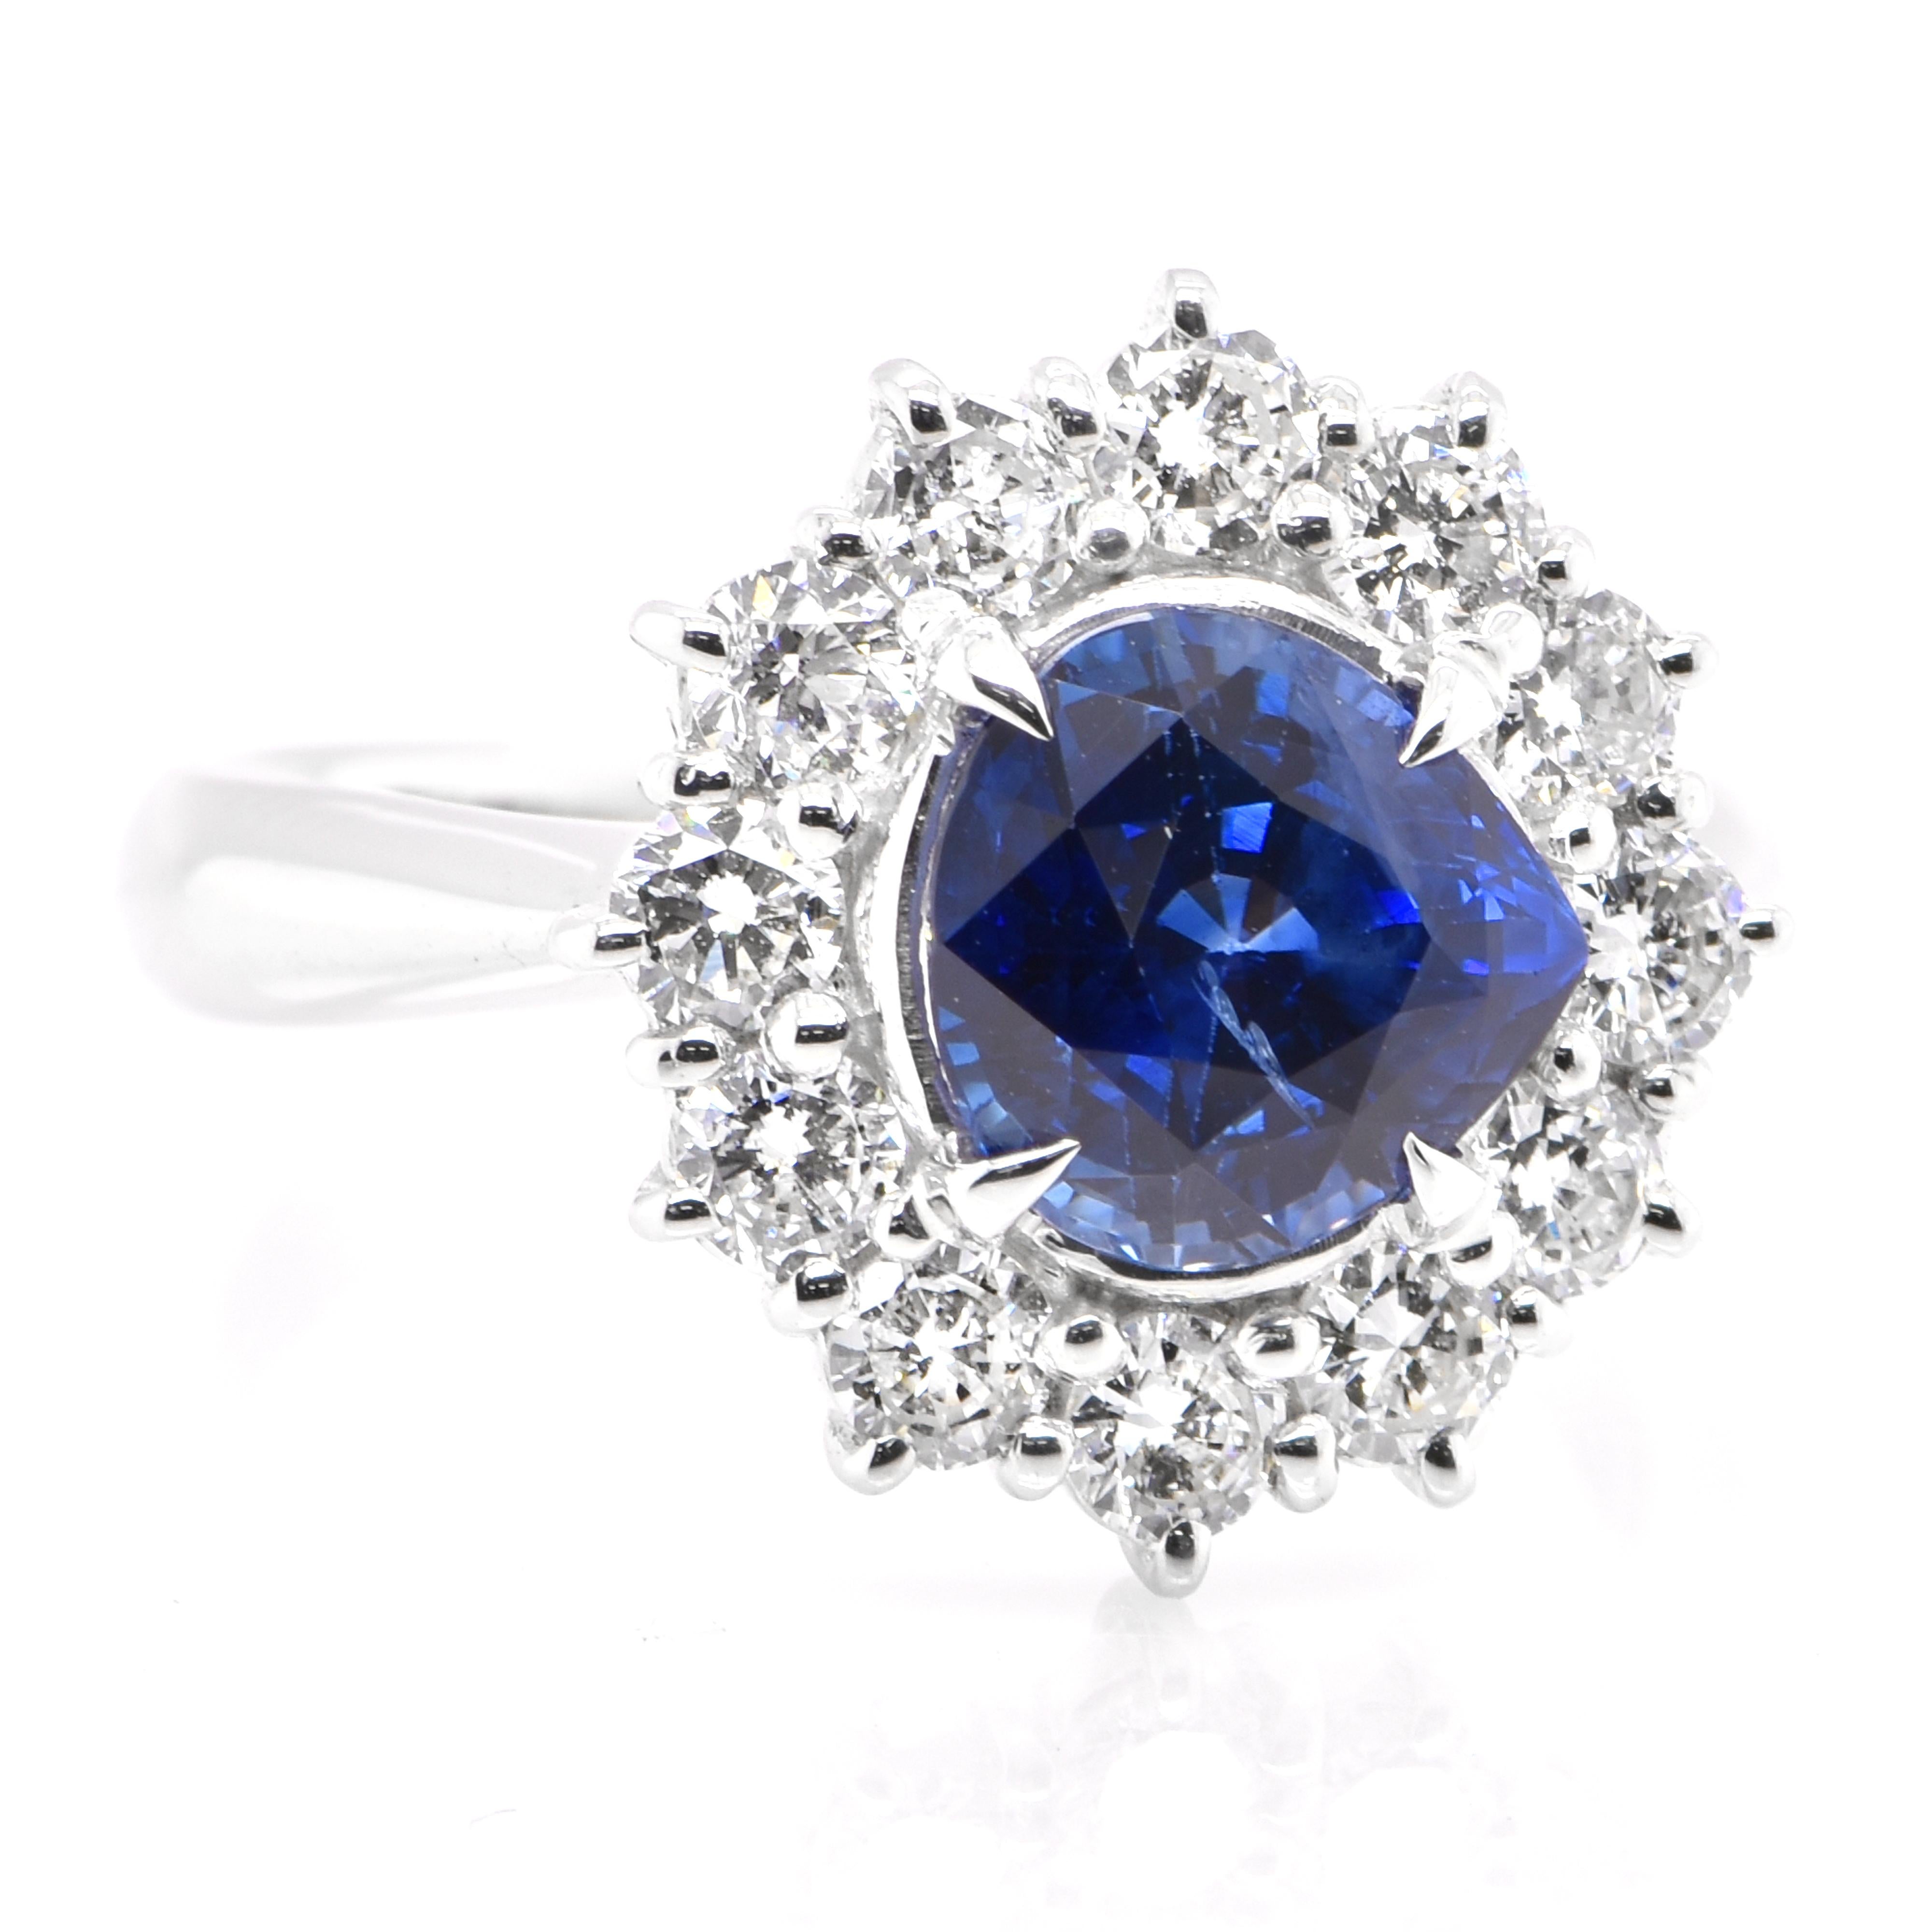 Modern 2.57 Carat Natural Royal Blue Sapphire and Diamond Ring Set in Platinum For Sale